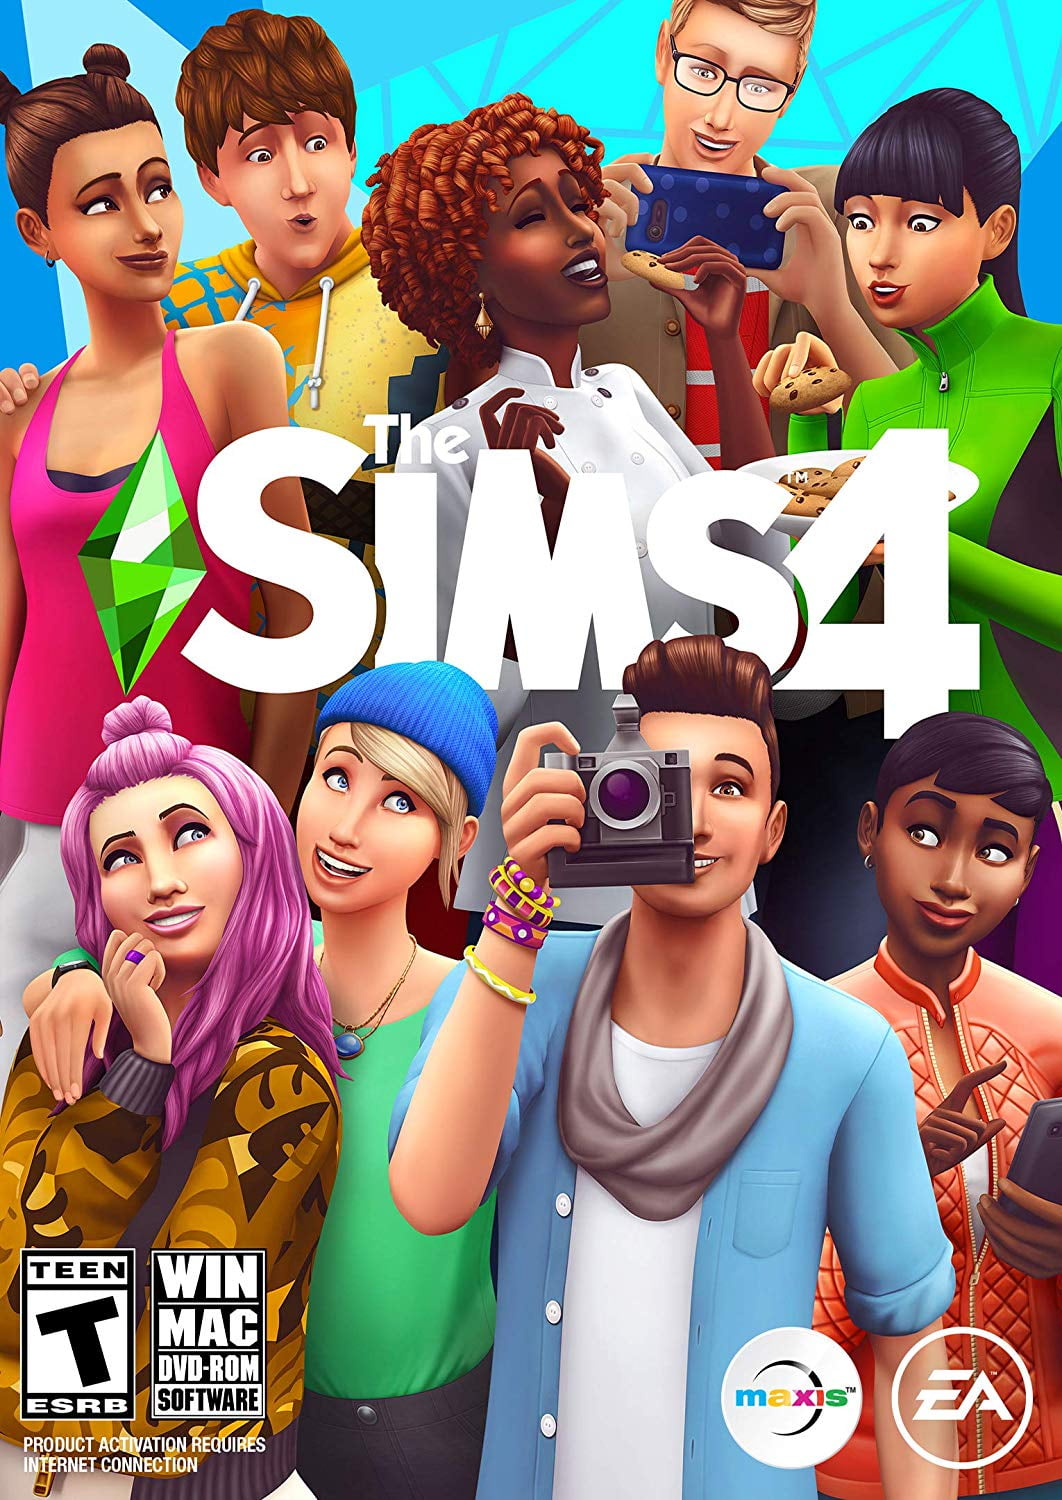 The Sims 4: Limited Edition, Electronic Arts, PC, Mac, [Physical ...